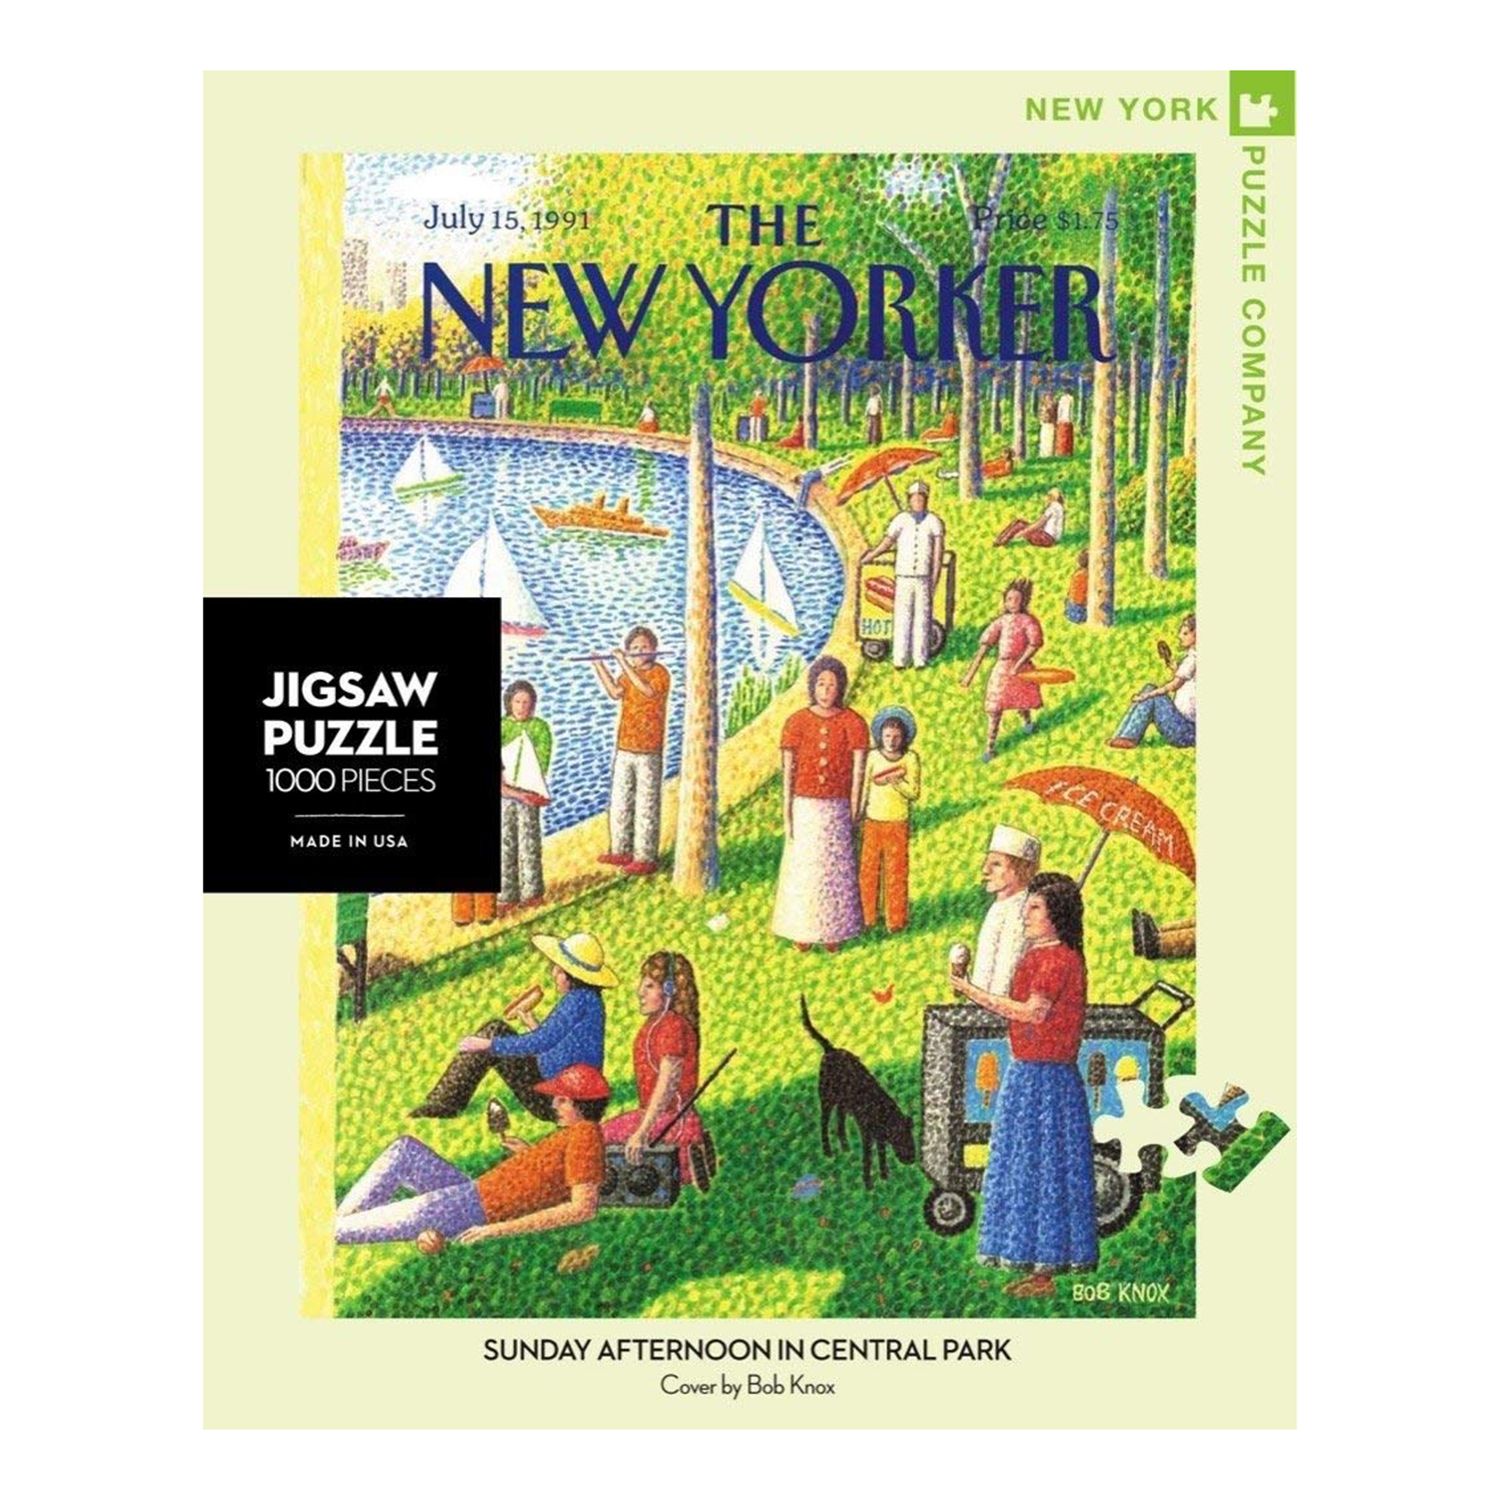 New York Puzzle Company New Yorker zondagmiddag in Central Park